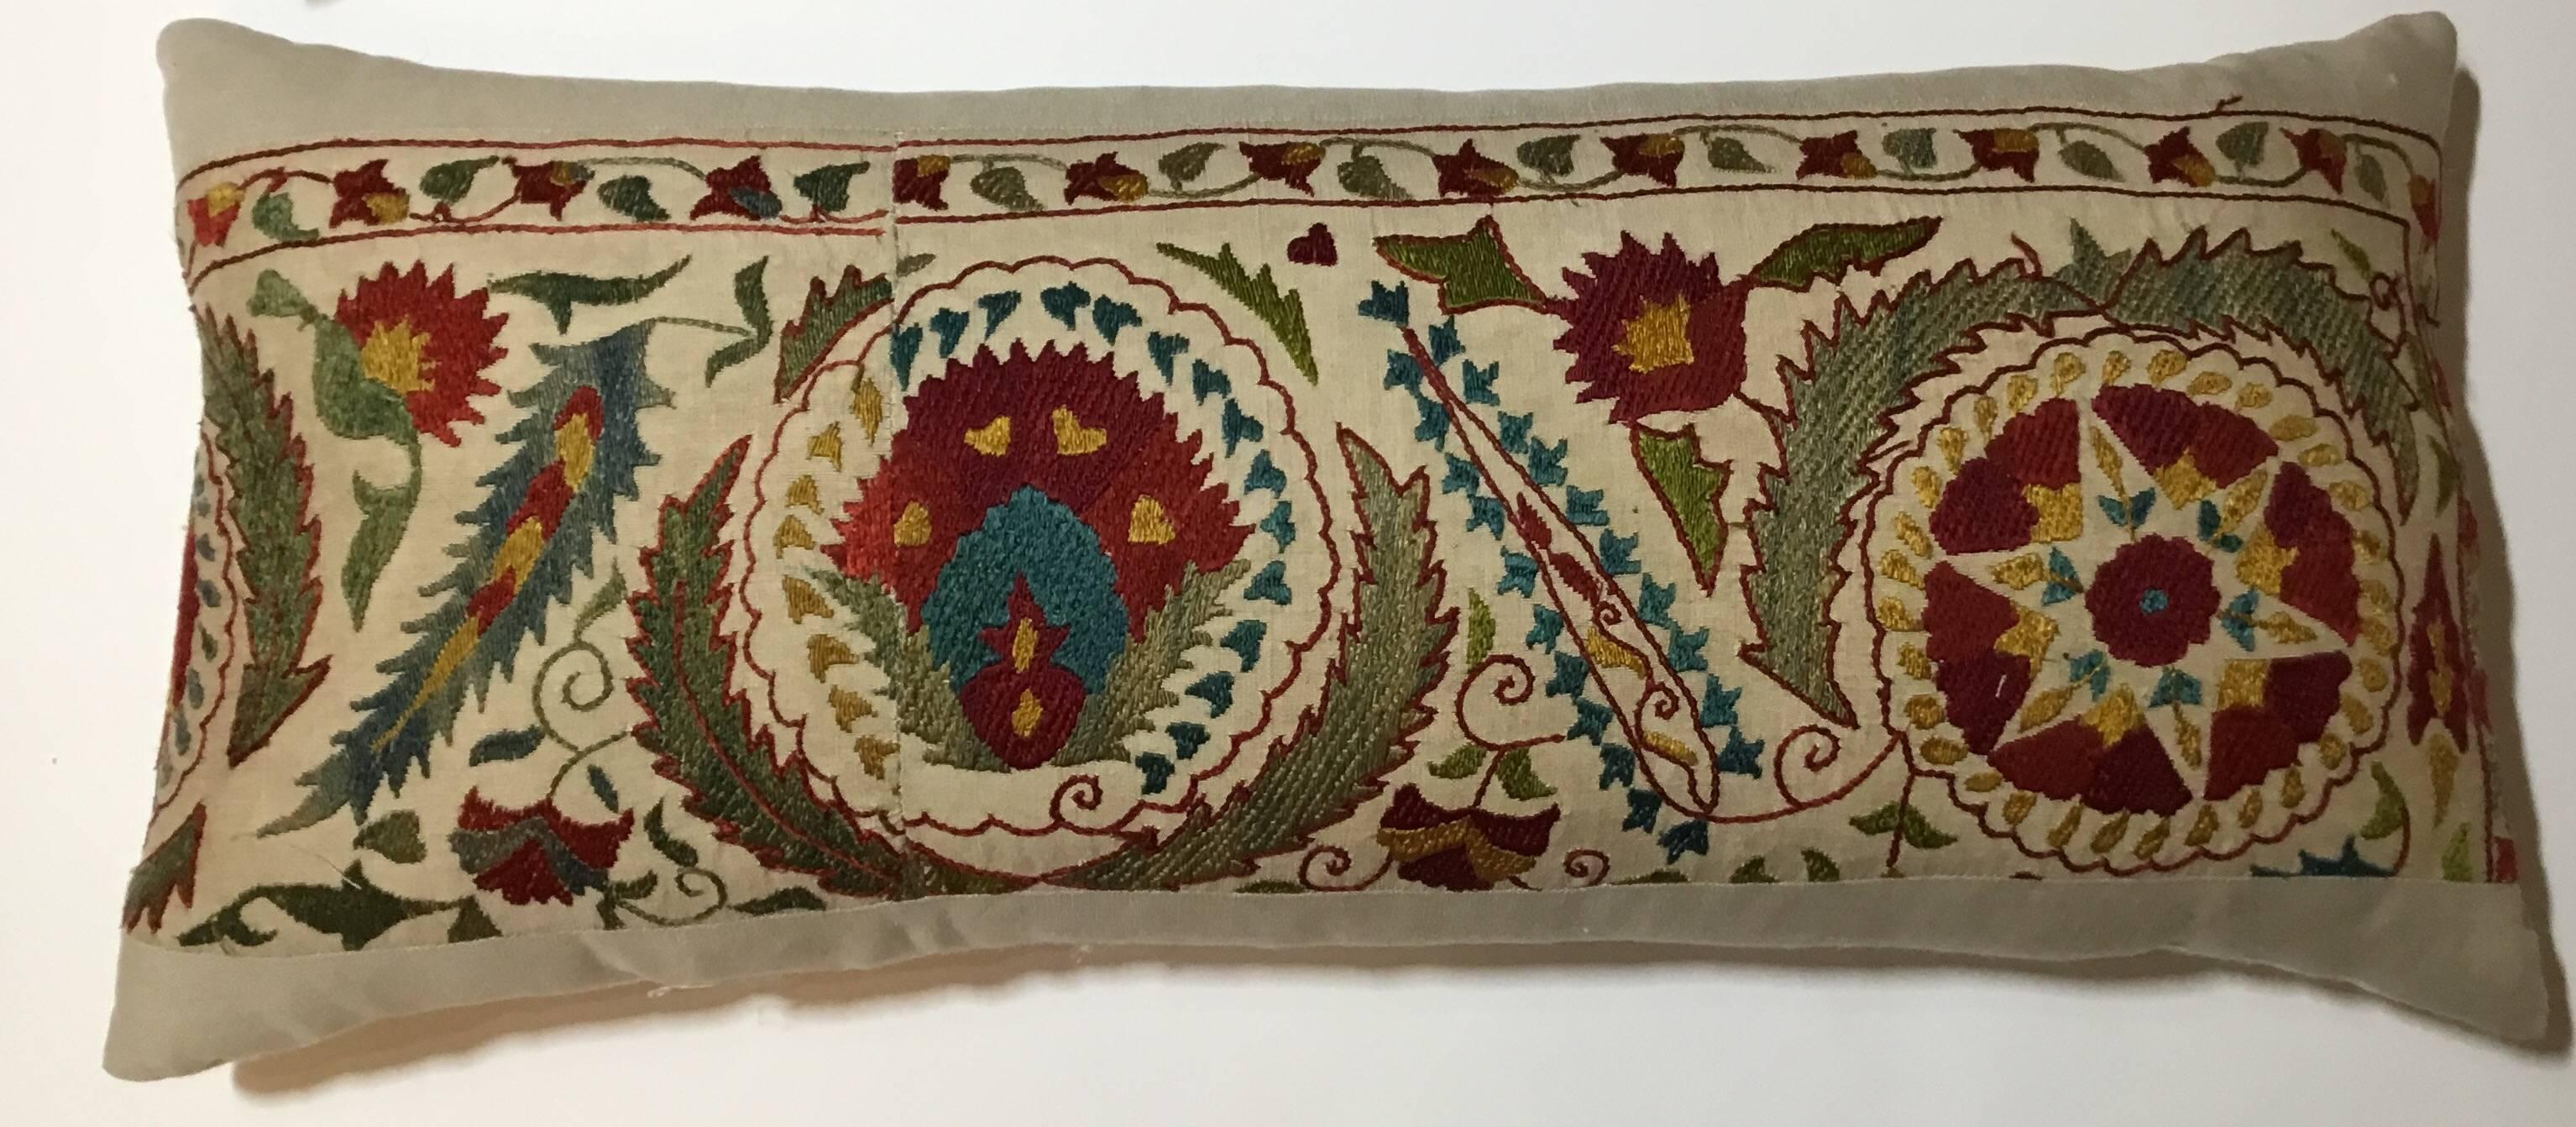 Beautiful pair of pillows made of hand embroidery silk on cream cotton background, colorful motif of vine and flowers, linen sides and background,
Frash inserts.